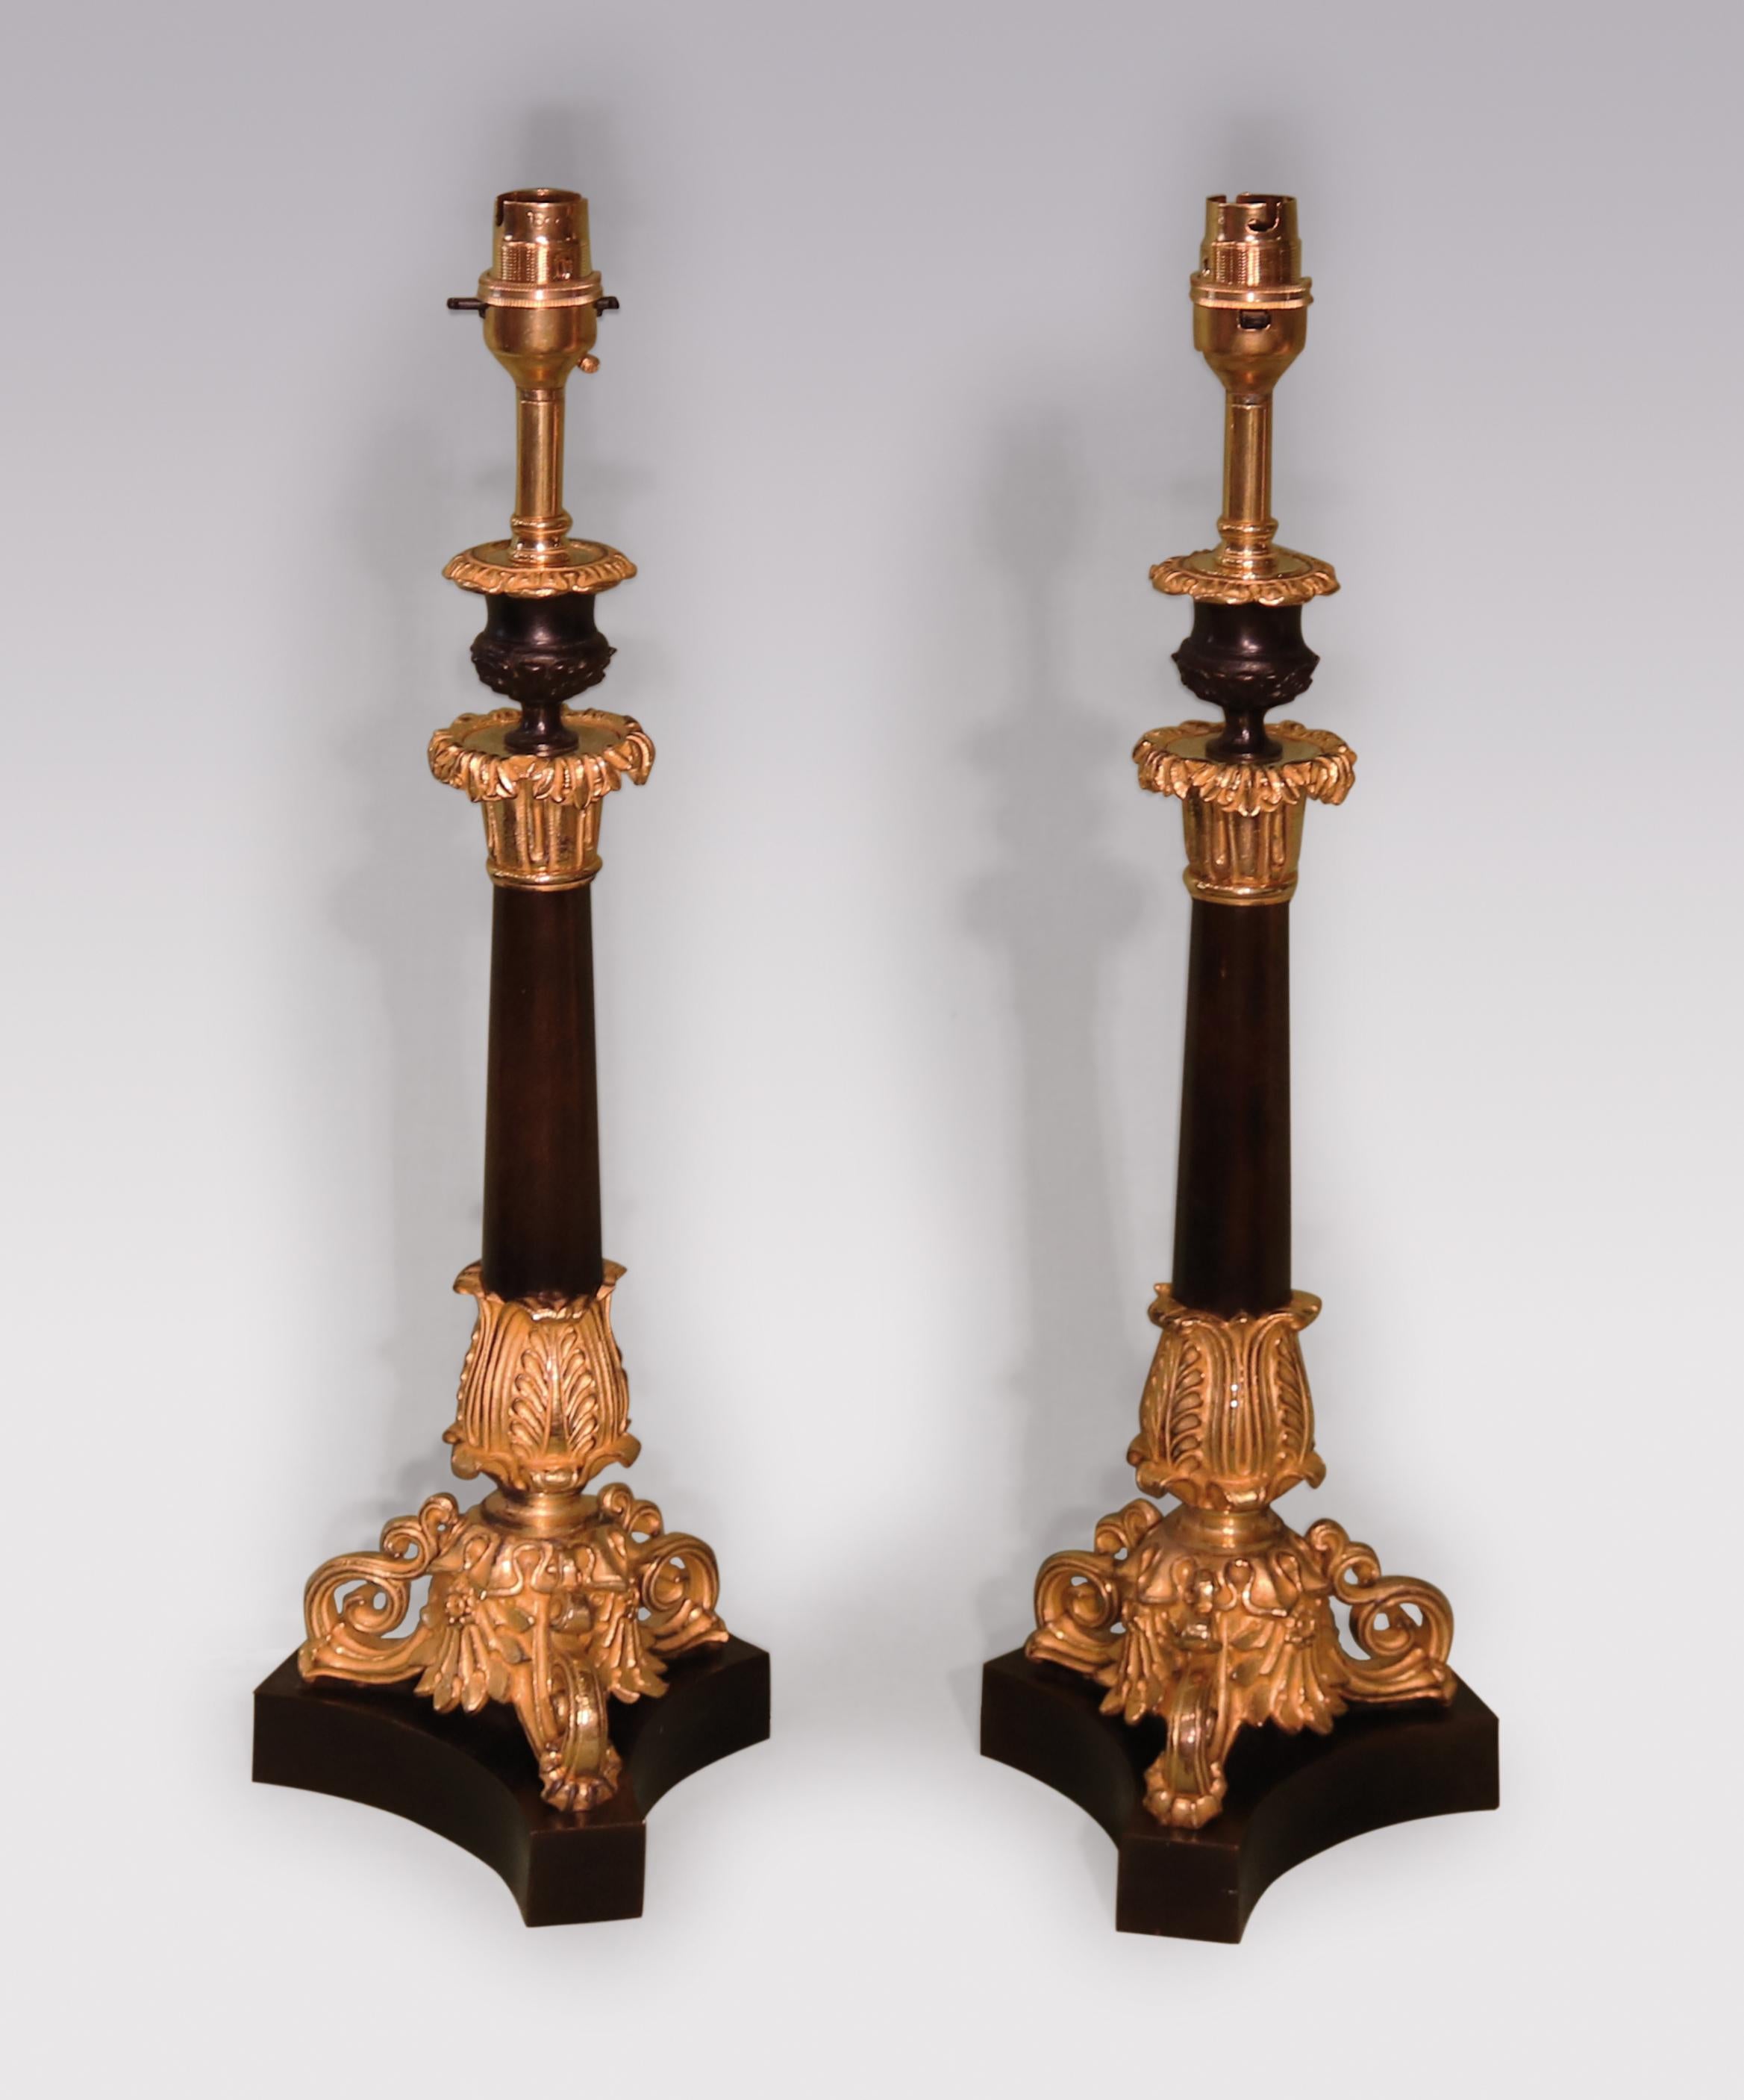 Early Victorian Pair of Mid 19th Century Bronze and Ormolu Candlestick Lamps For Sale